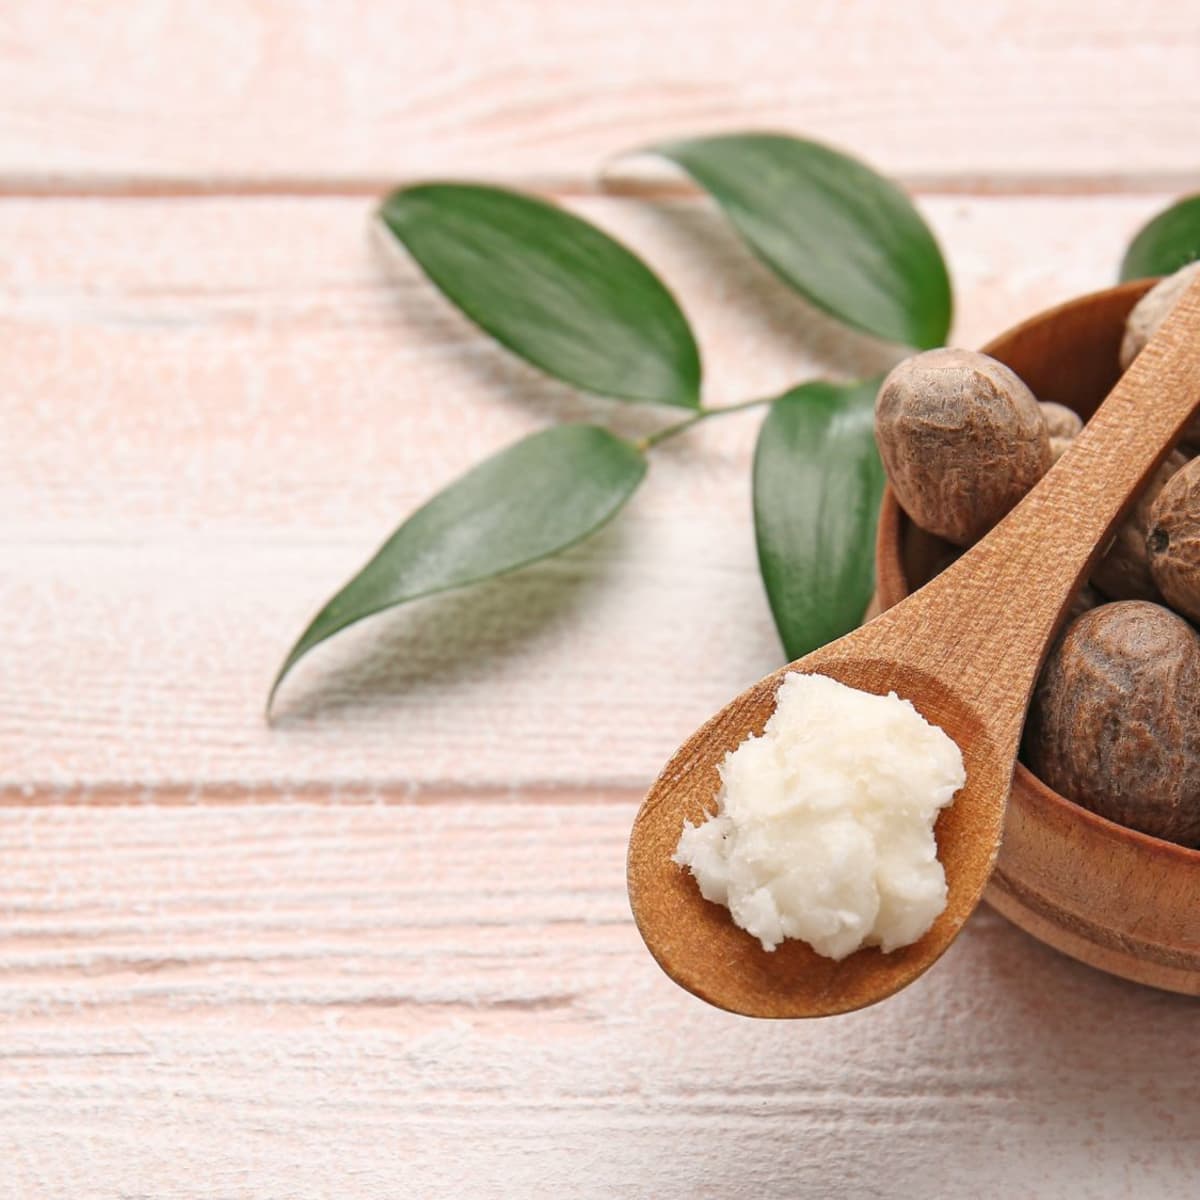 Shea Butter Benefits for Skin and Hair and Facial Moisturizer Recipe